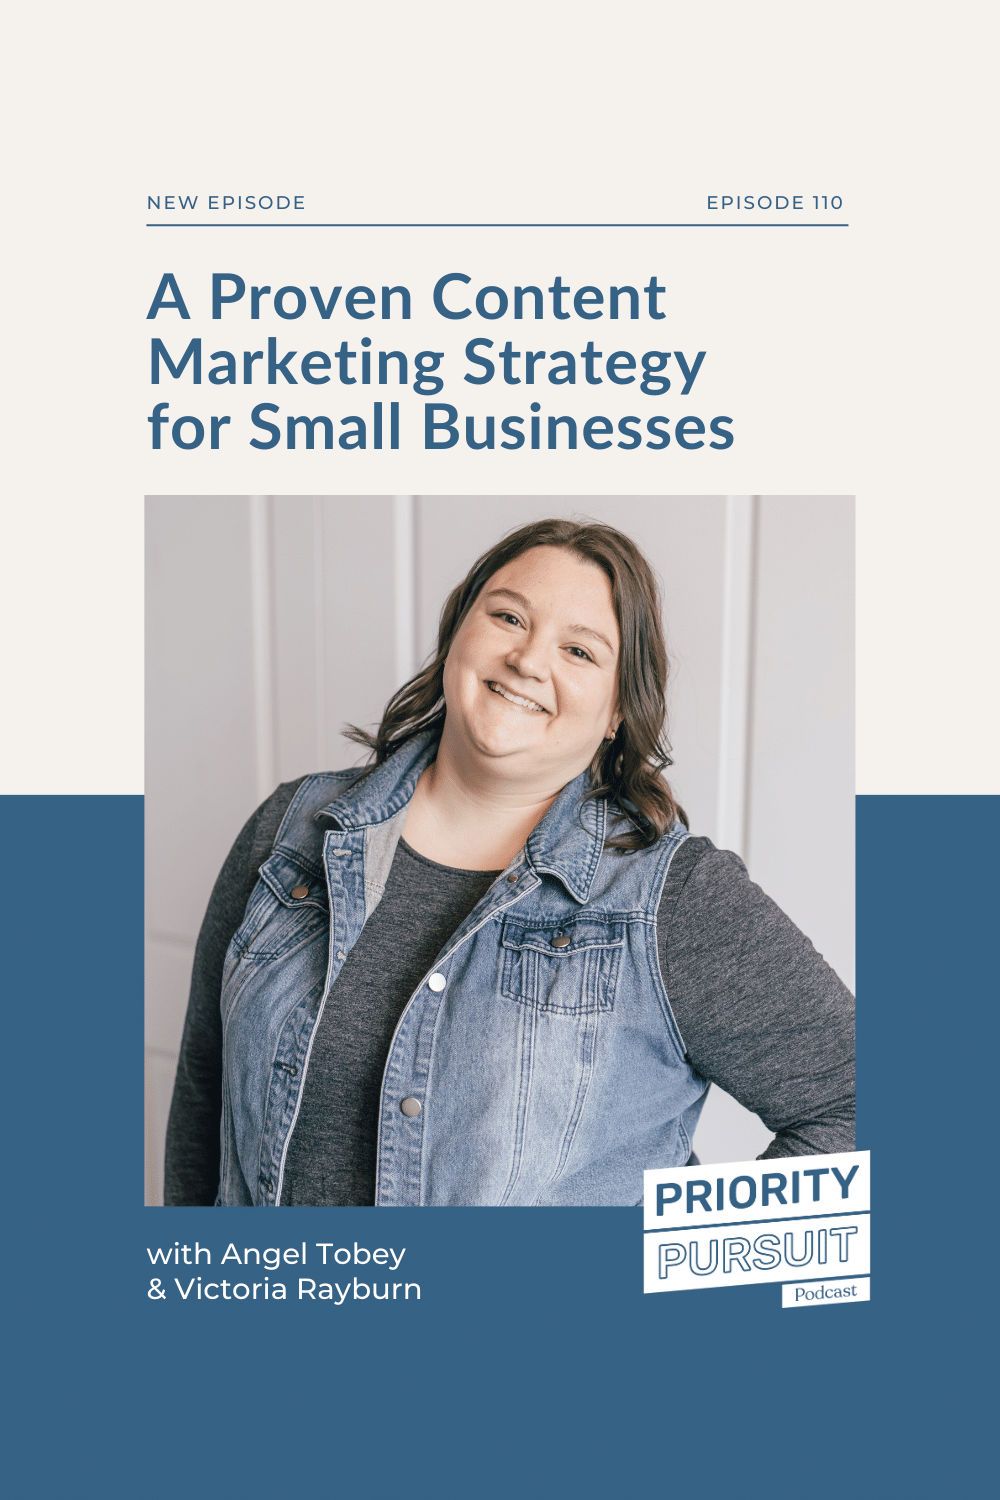 Angel Tobey dives into how you can attract and foster connection with your ideal customers AND improve your SEO with a content marketing strategy for small businesses.